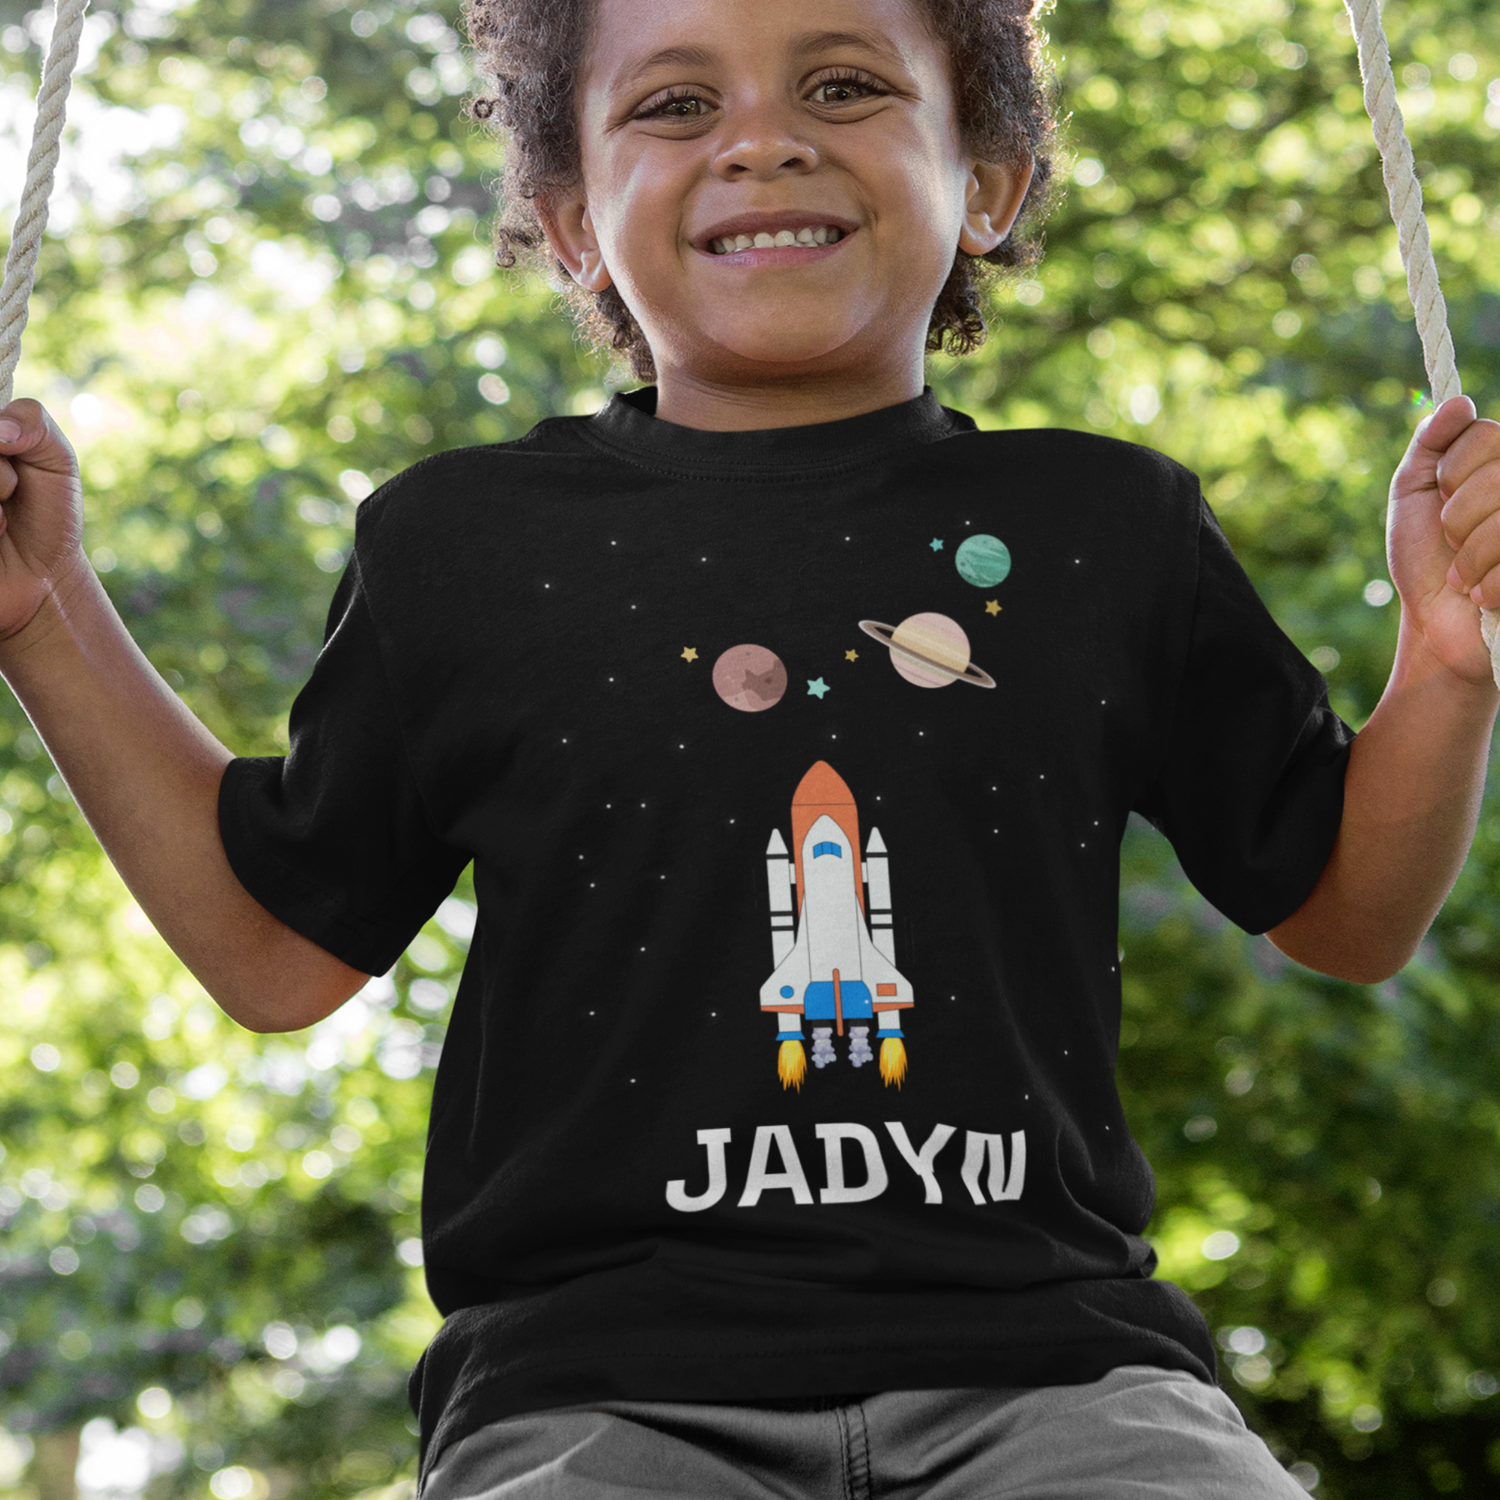 Black t-shirt with boy's name and space shuttle graphic